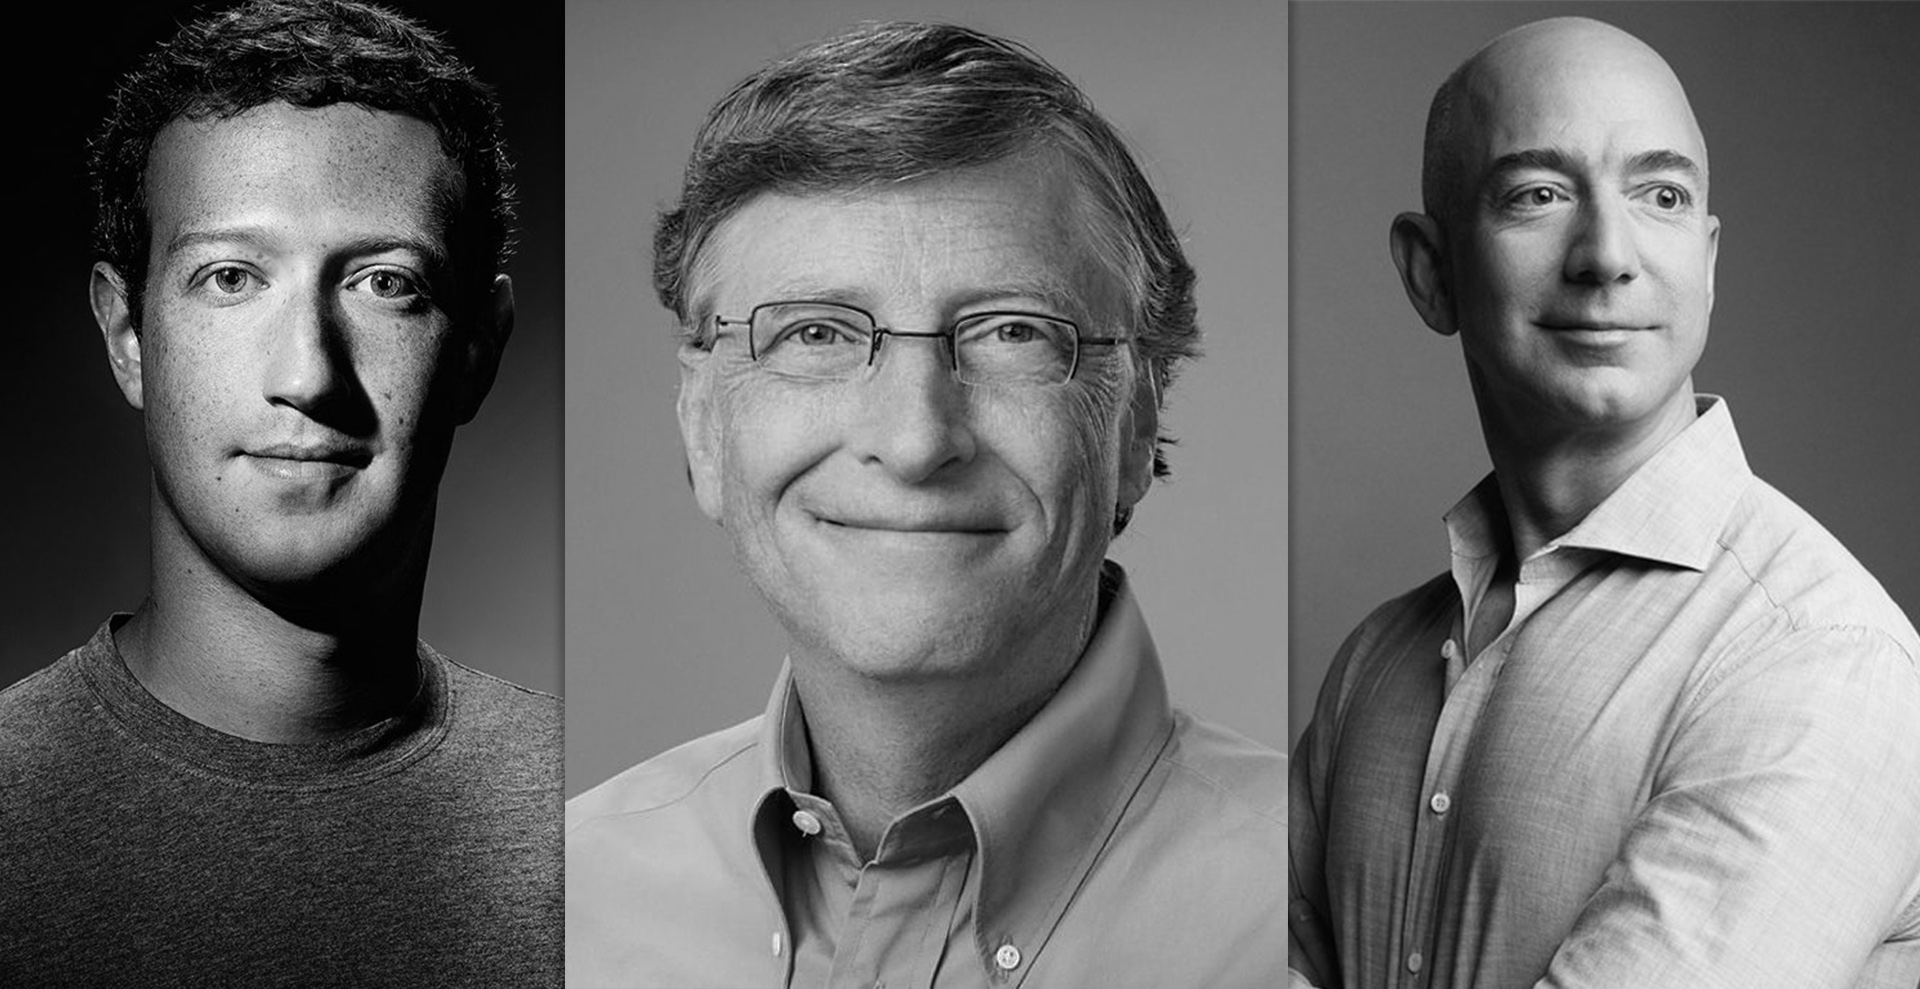 WHAT IS 2022 PREPARING FOR US? Famous entrepreneurs and visionaries Mark Zuckerberg, Jeff Bezos and Bill Gates on how our world is going to change soon